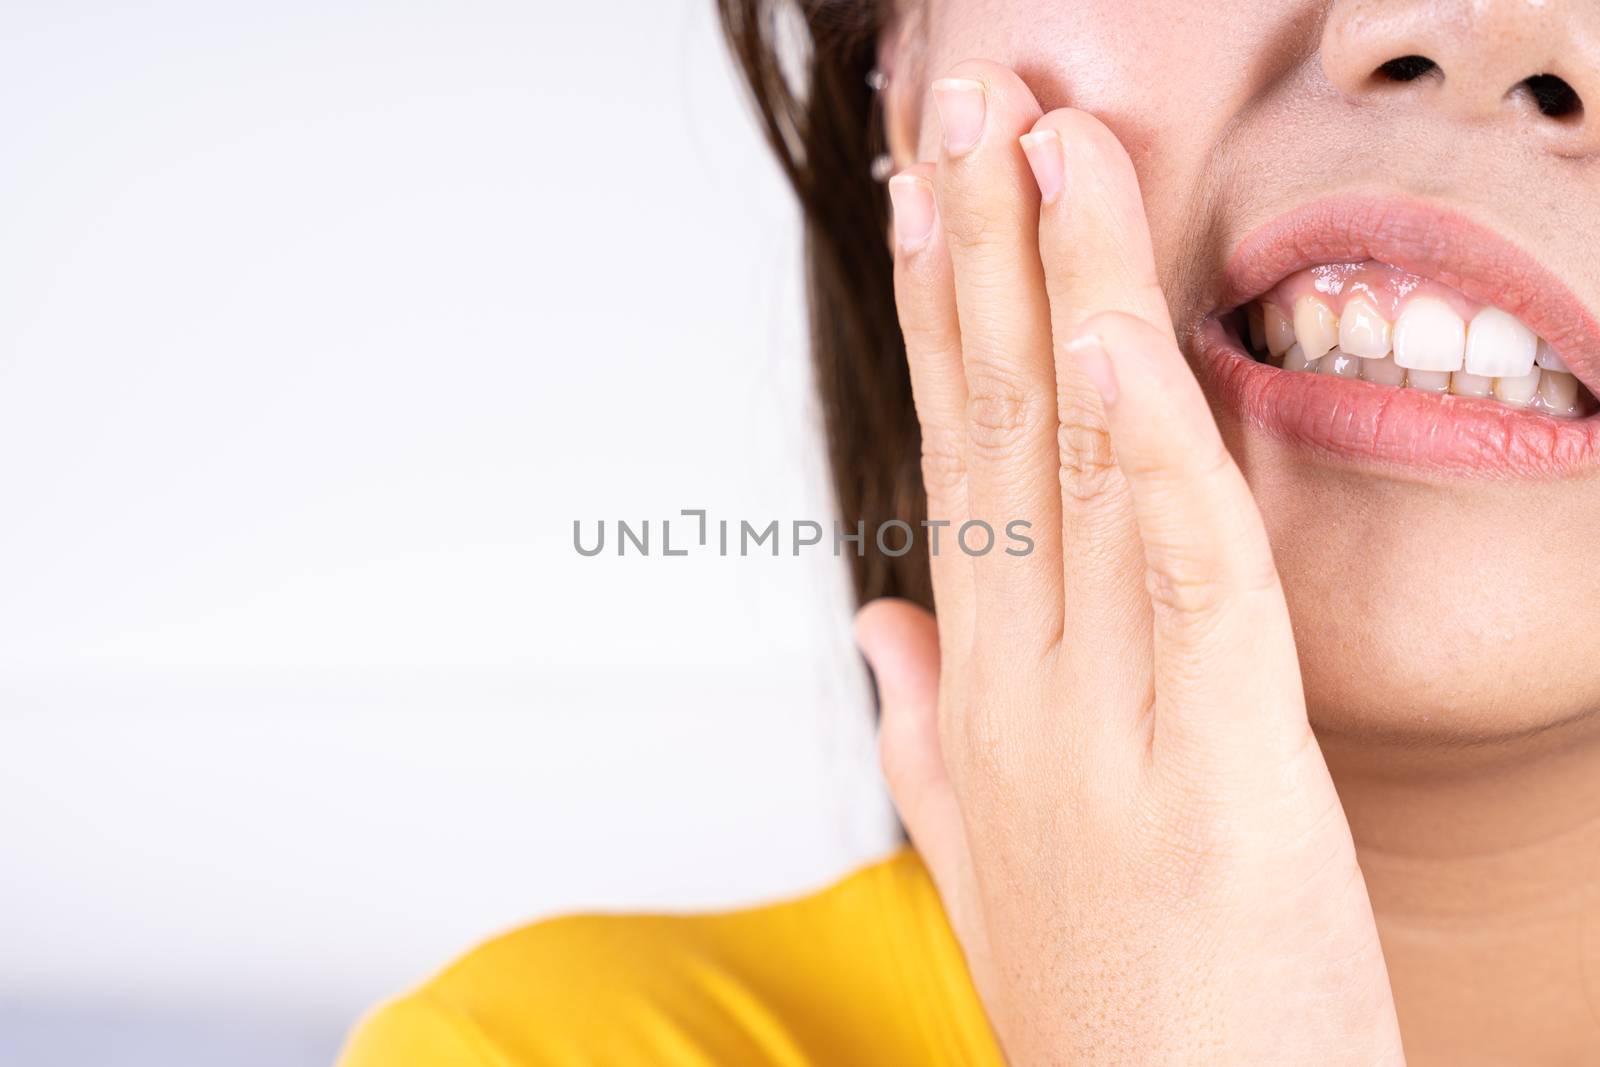 Woman suffering from toothache, hand touching wisdom tooth. Dental, healthcare concept by mikesaran